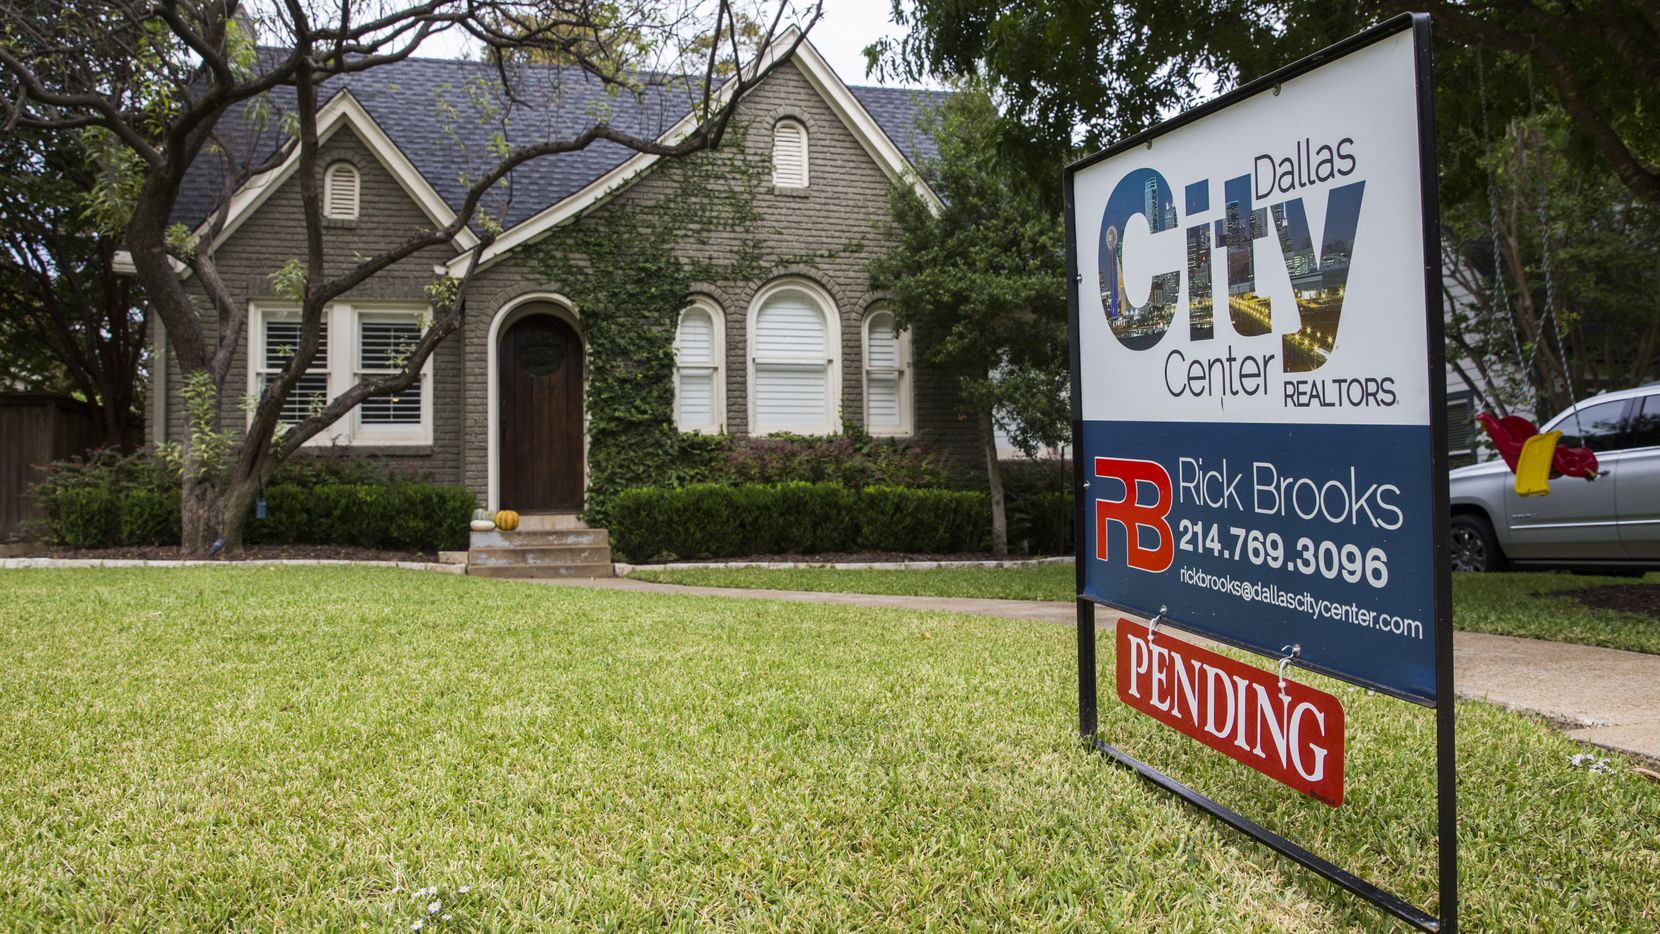 Real estate agents say that more home shoppers are looking at D-FW properties.